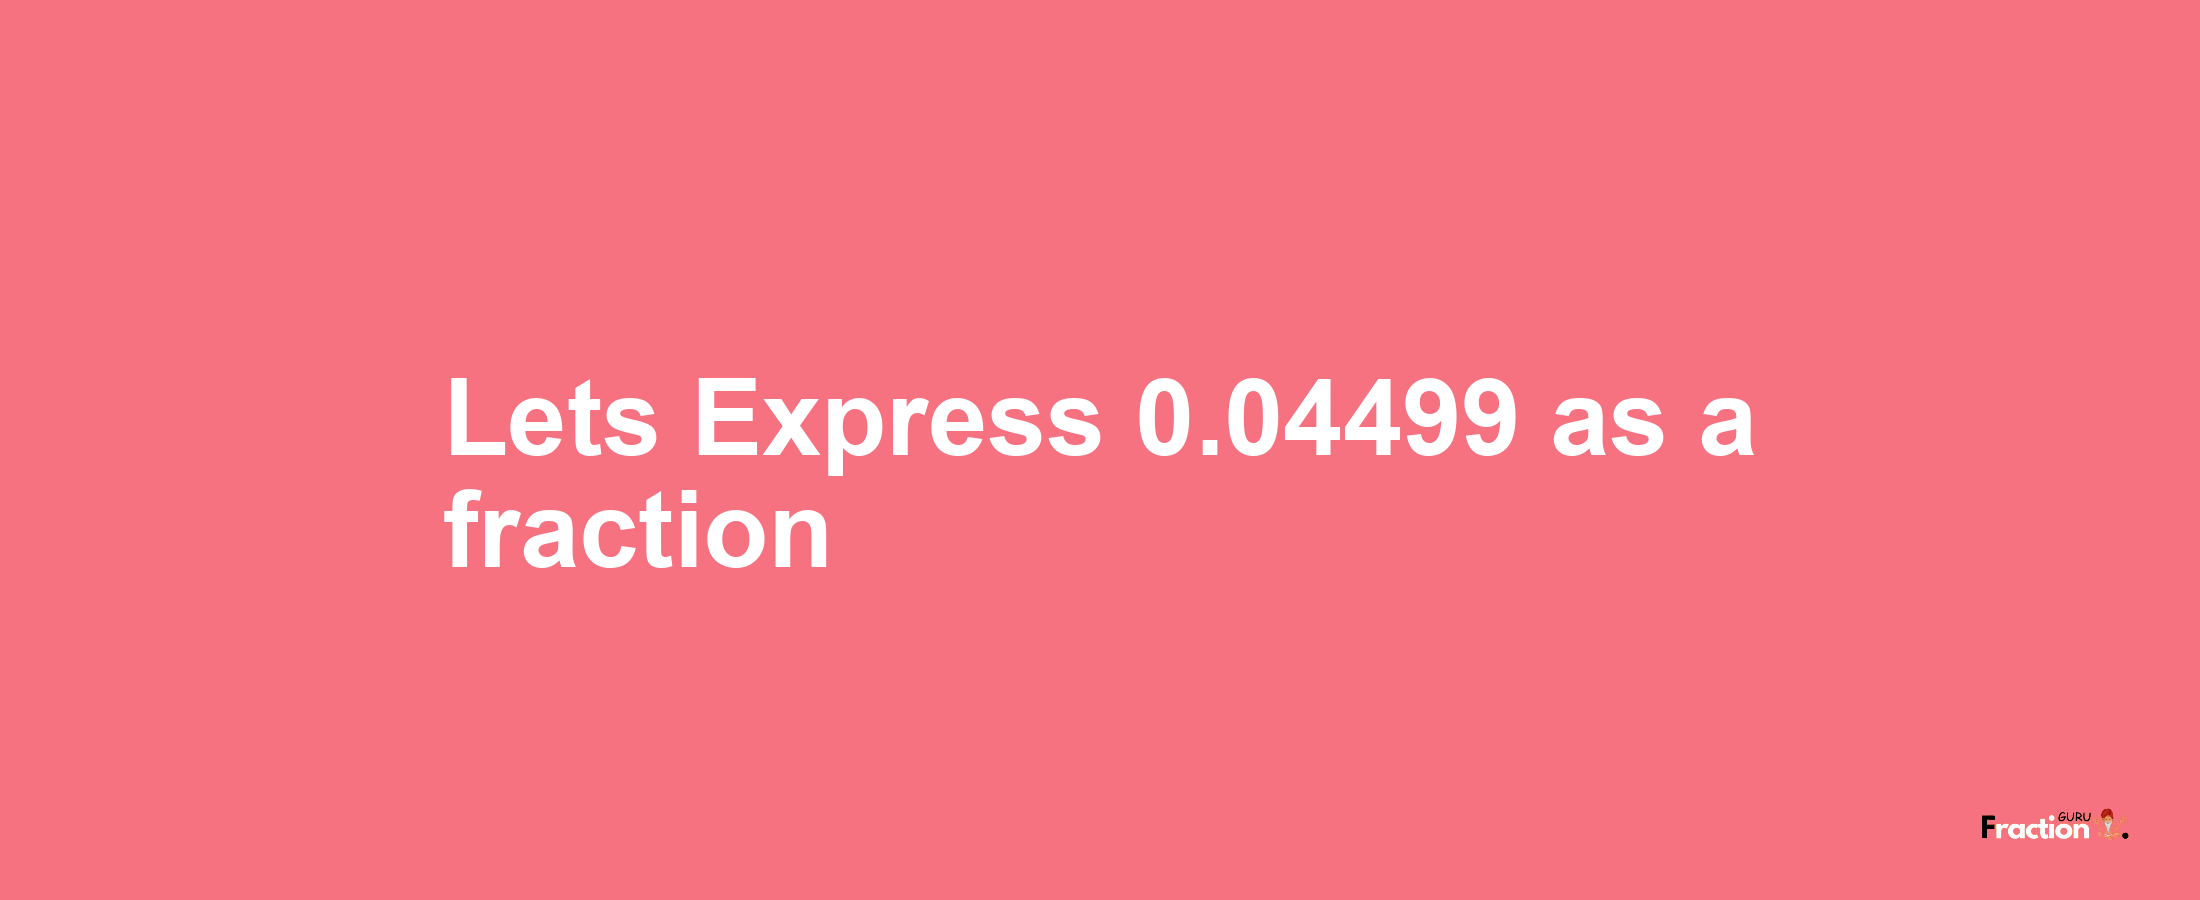 Lets Express 0.04499 as afraction